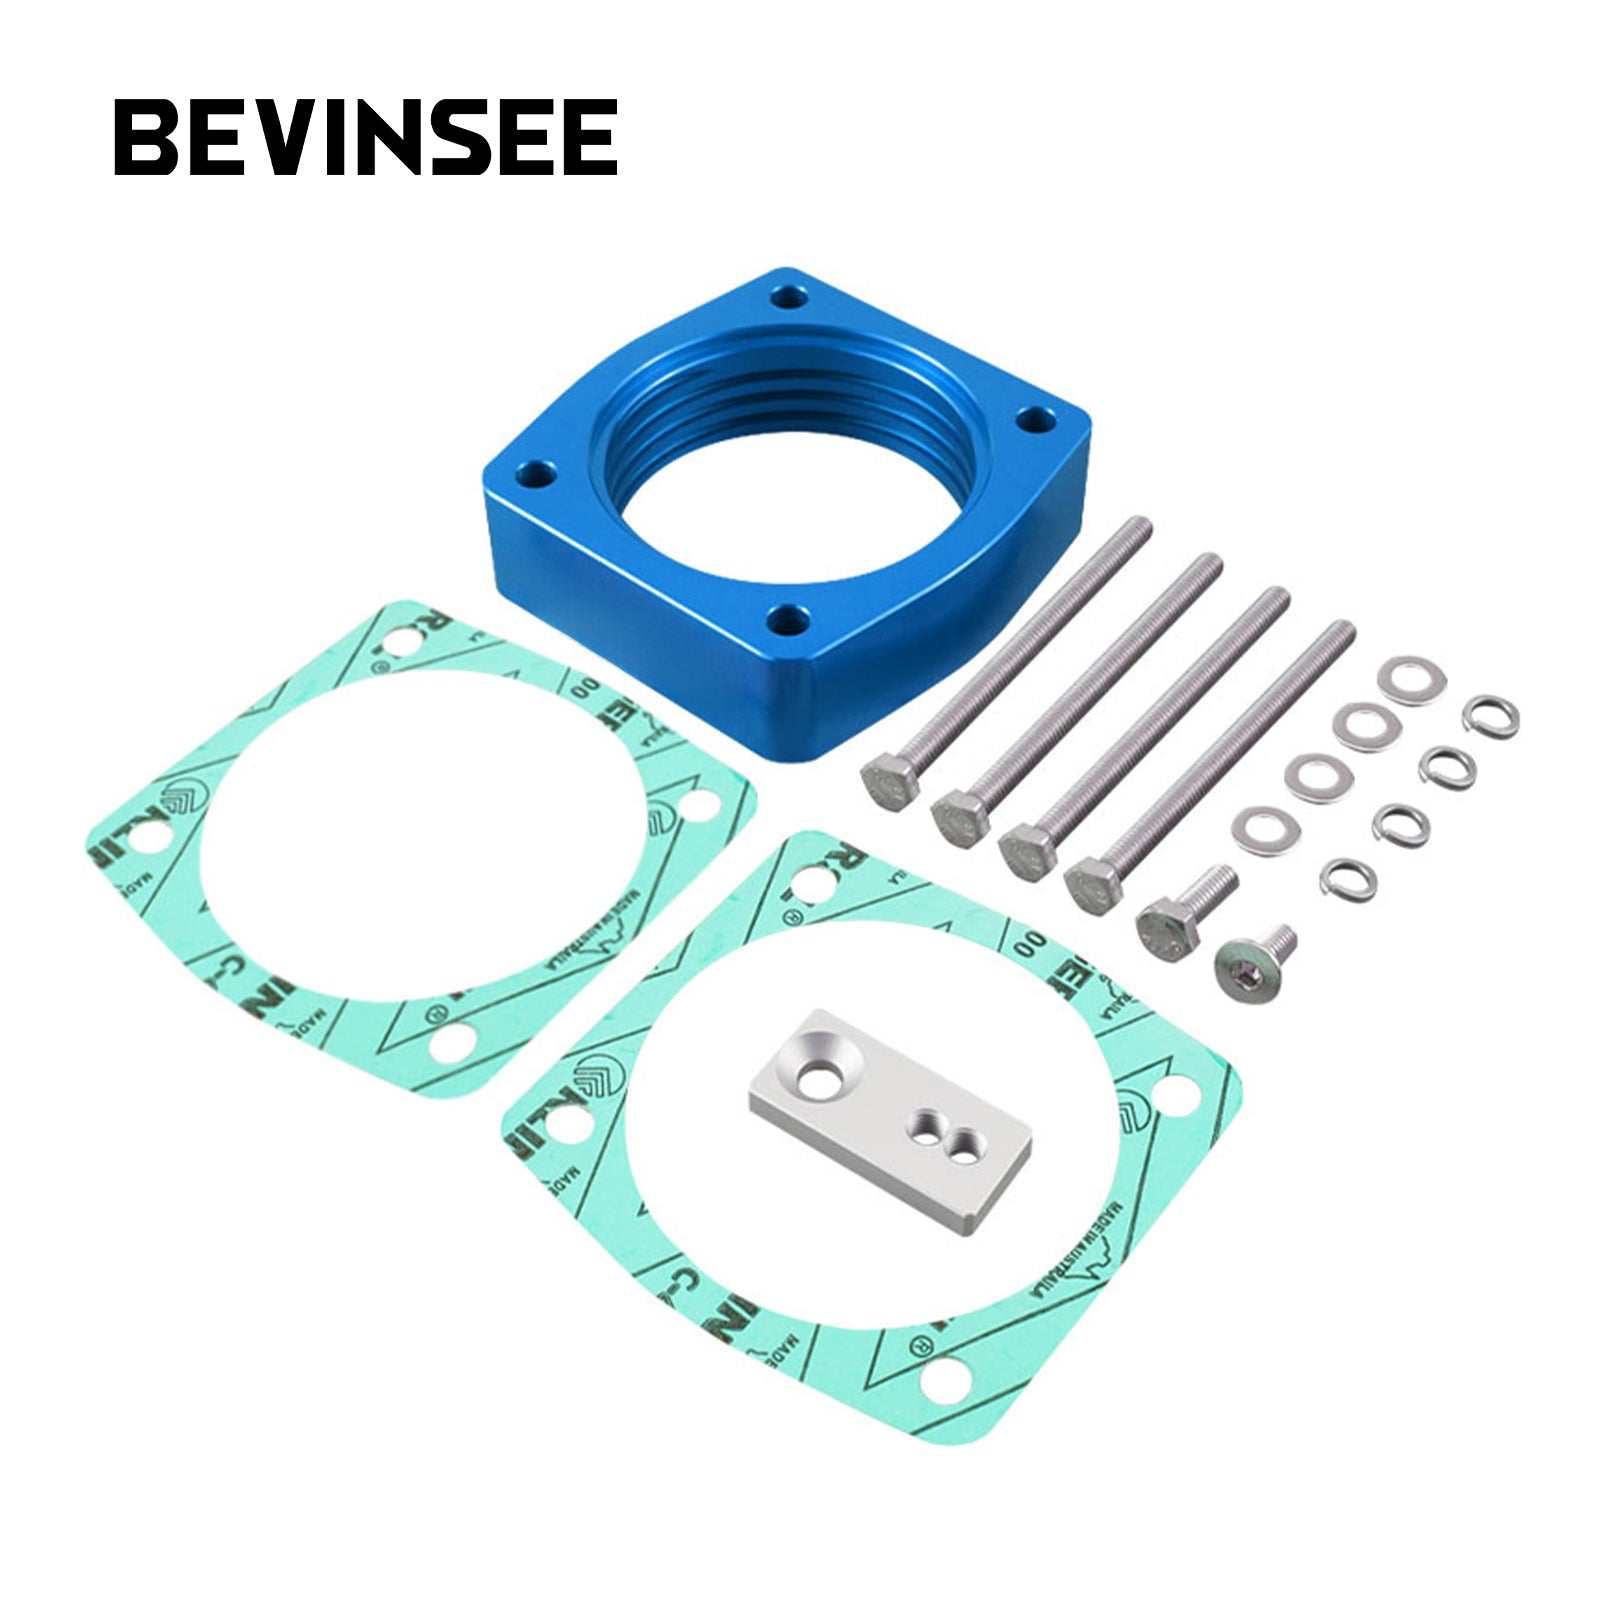 BEVINSEE Throttle Body Spacer for Nissan 350Z 3.5L Engine